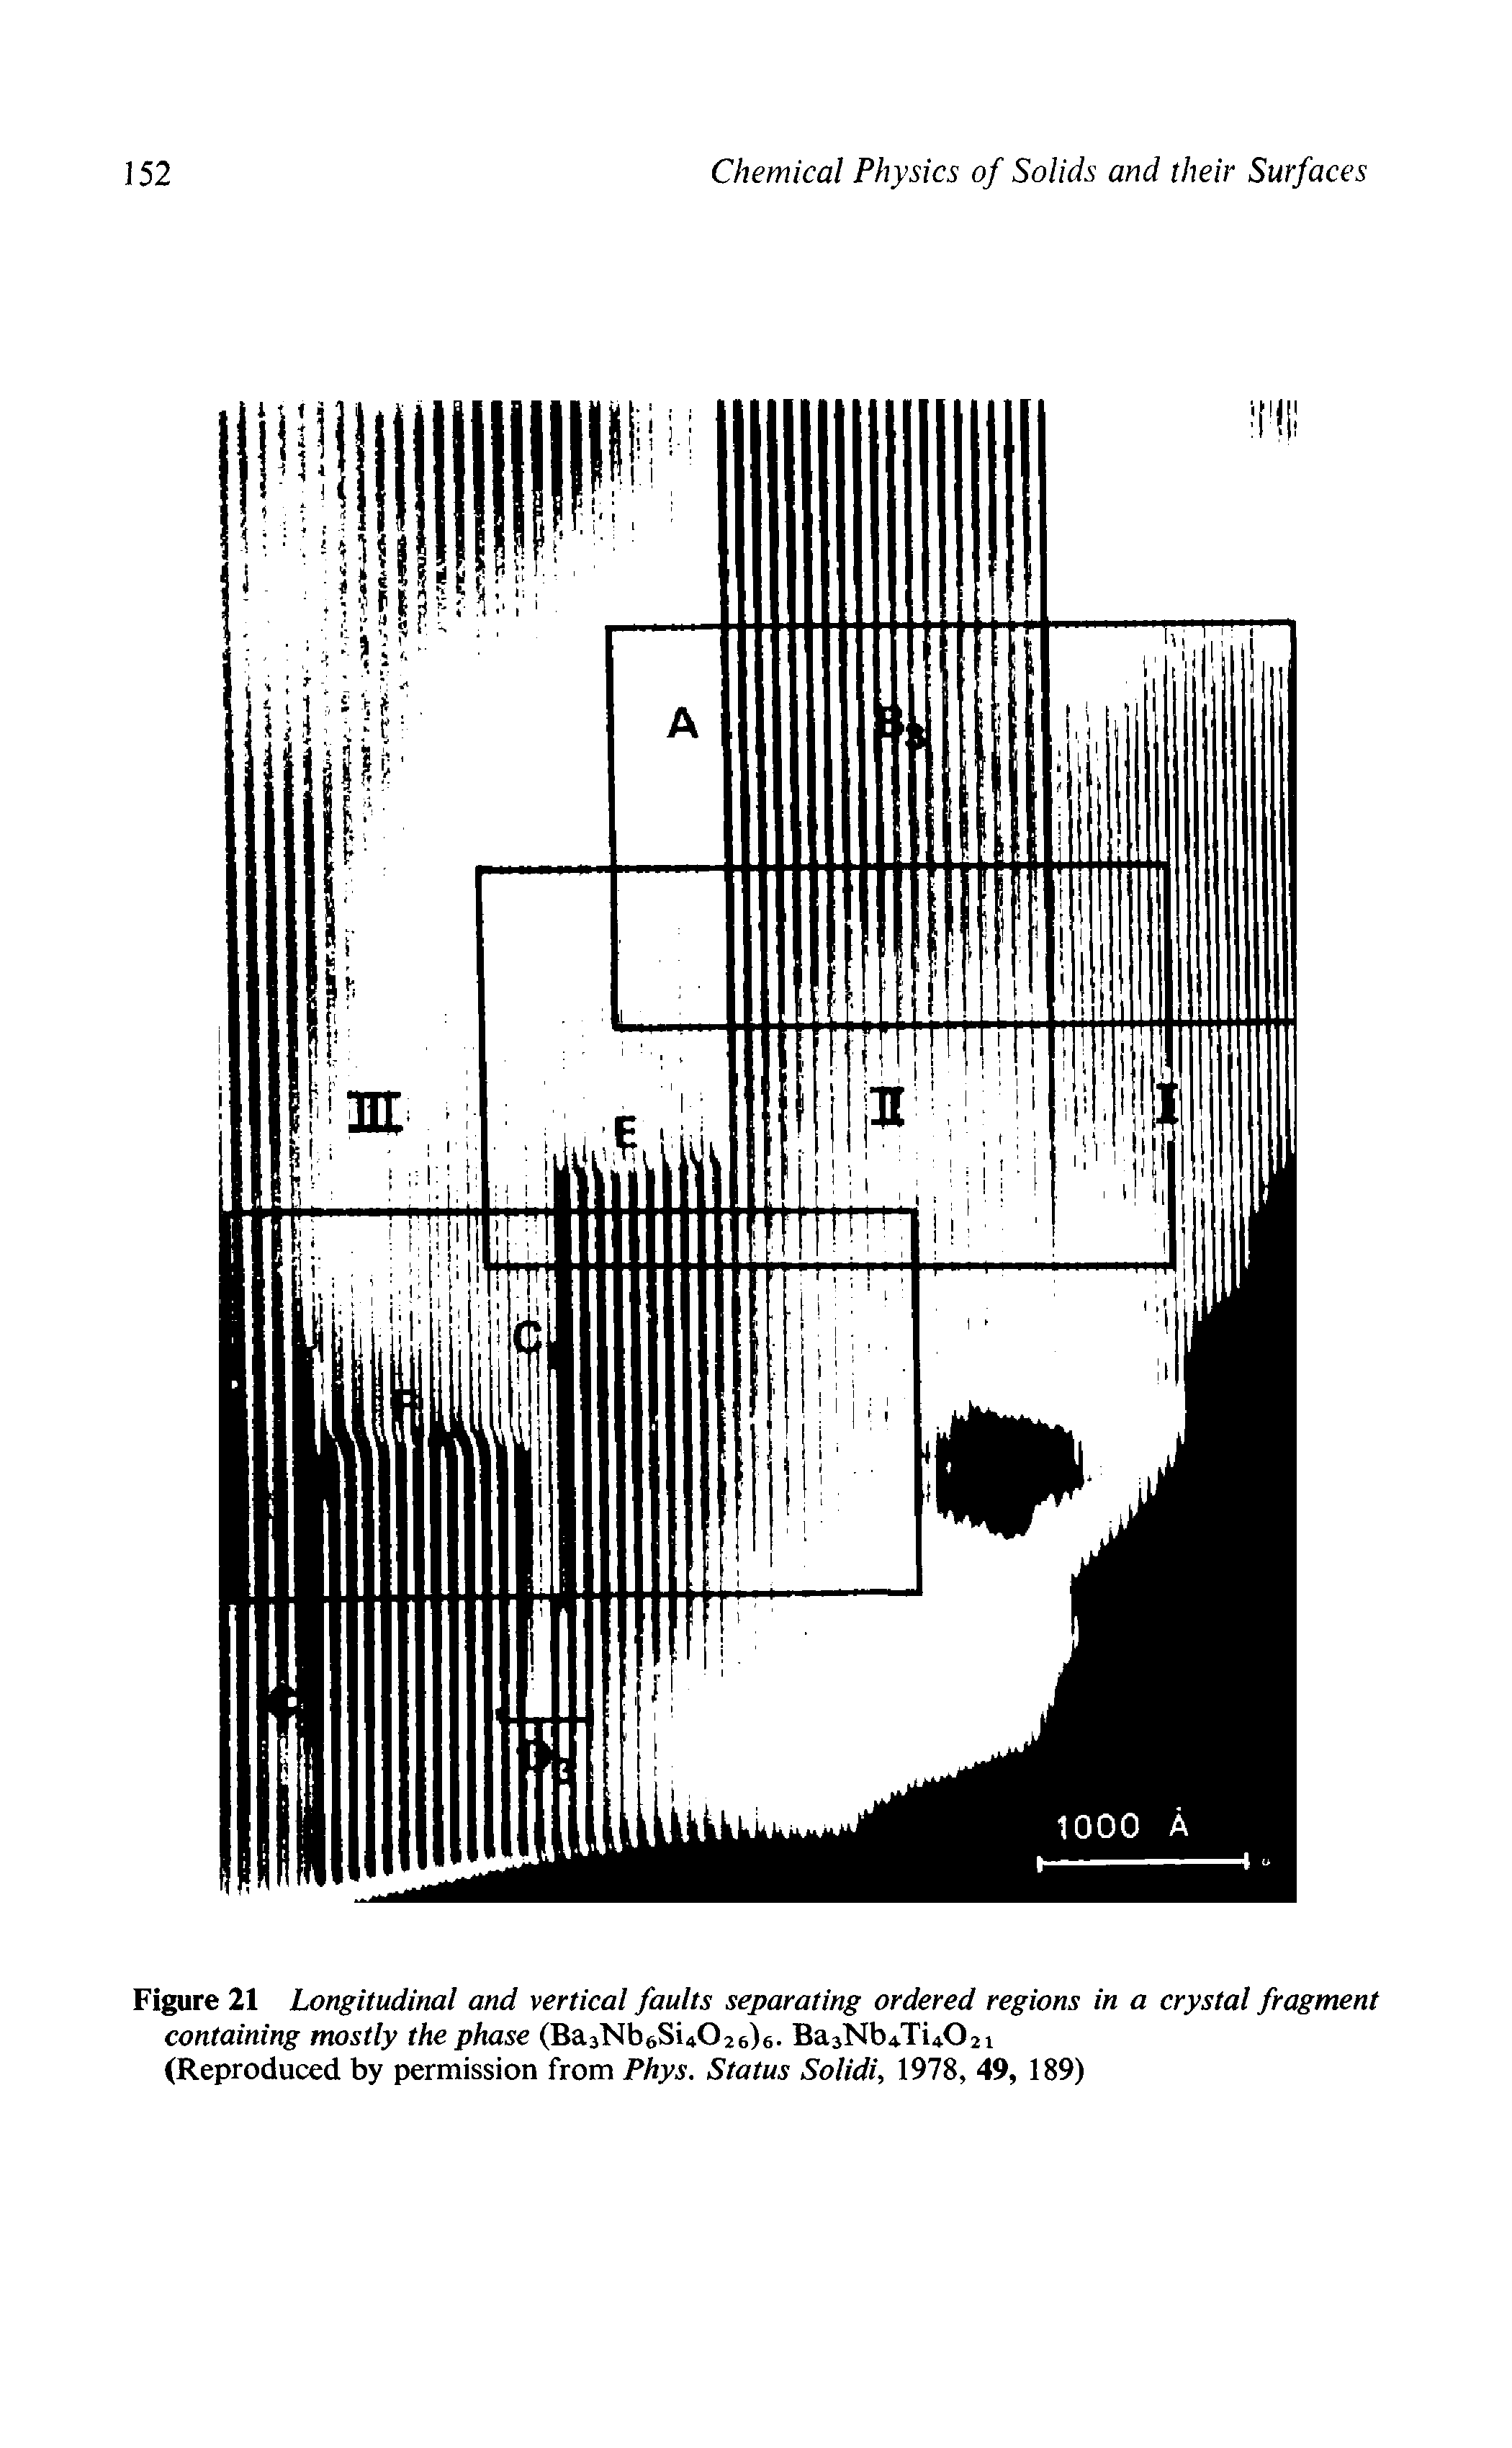 Figure 21 Longitudinal and vertical faults separating ordered regions in a crystal fragment containing mostly the phase (Ba3Nb6Si4026)6. BajNb Ti Oii (Reproduced by permission from Phys. Status Solidi, 1978, 49, 189)...